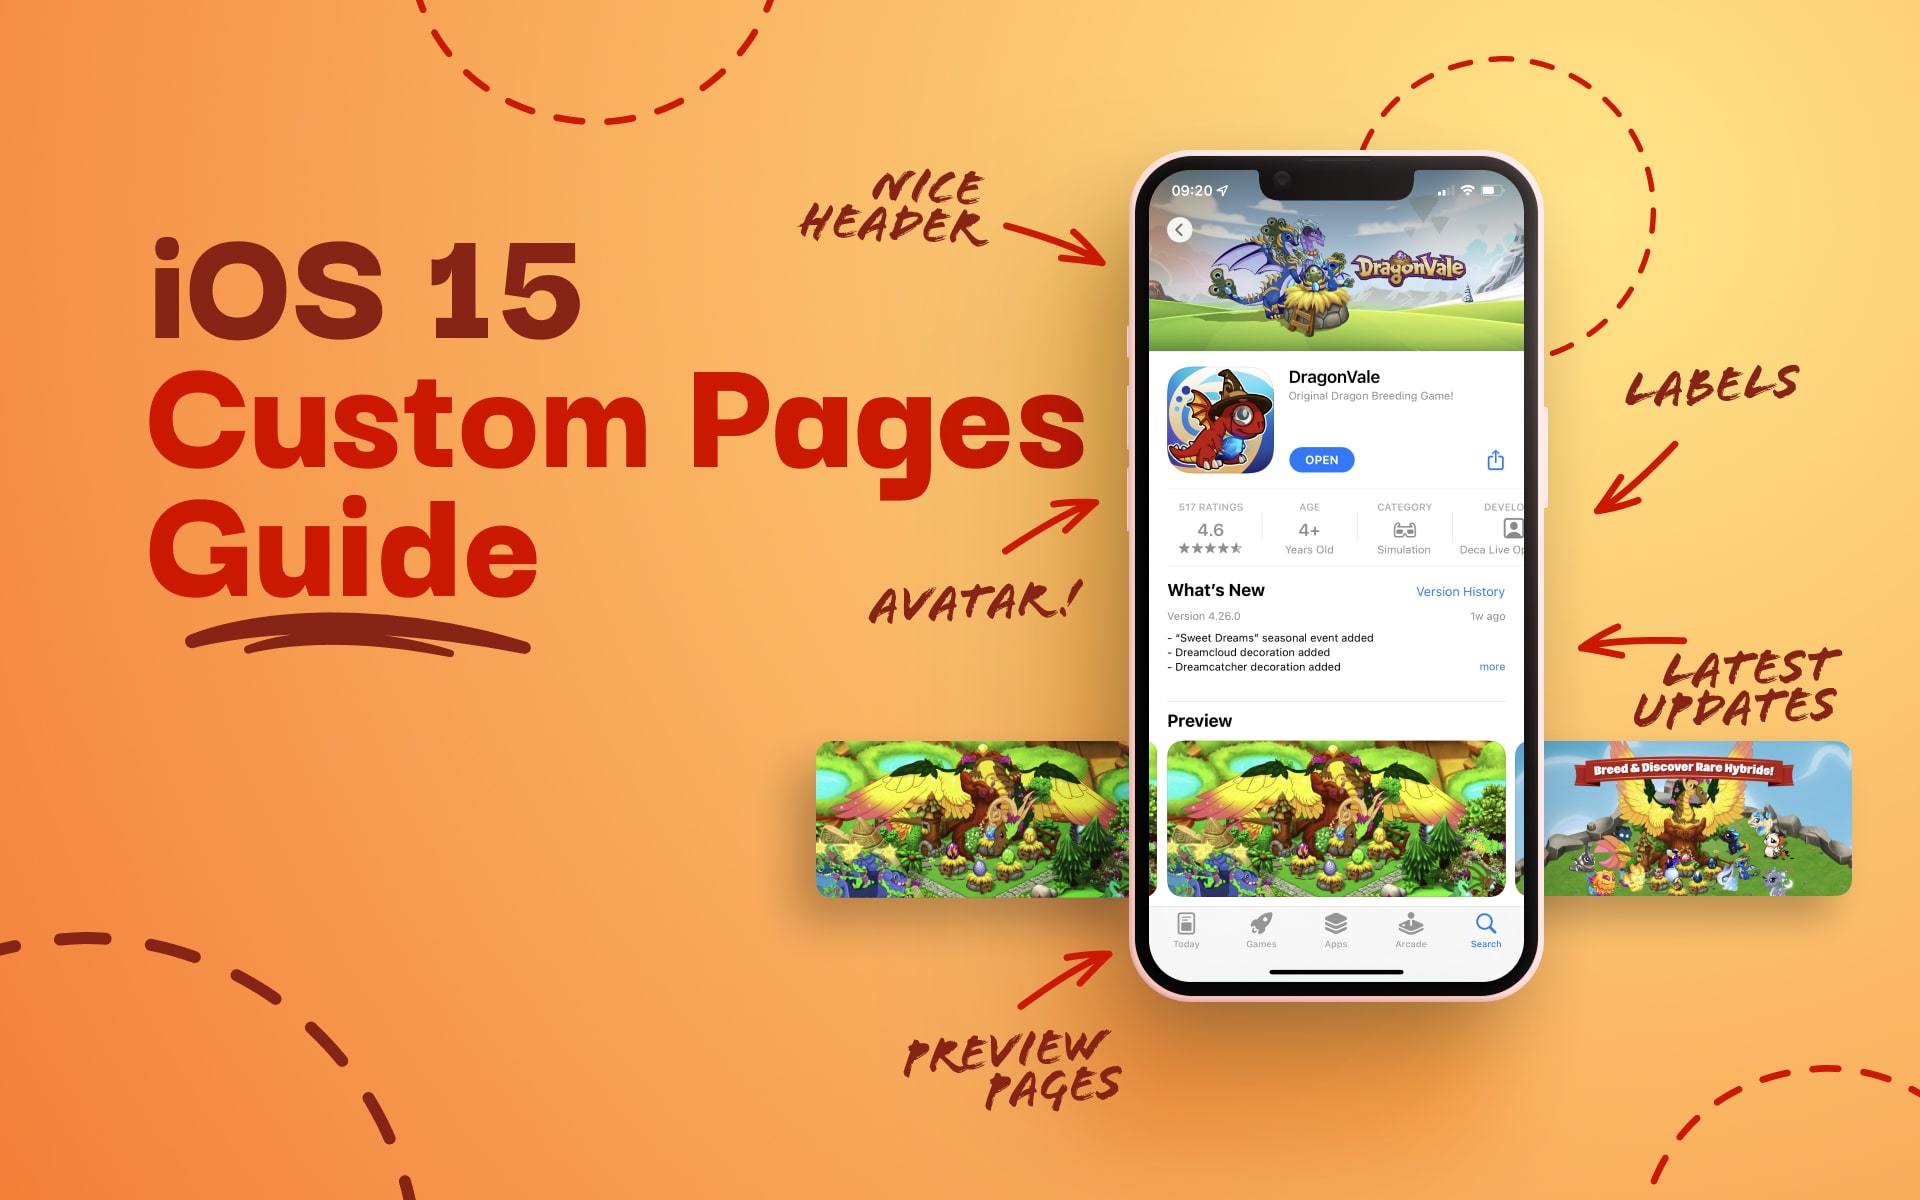 Apple's iOS 15 Custom Product Pages Guide